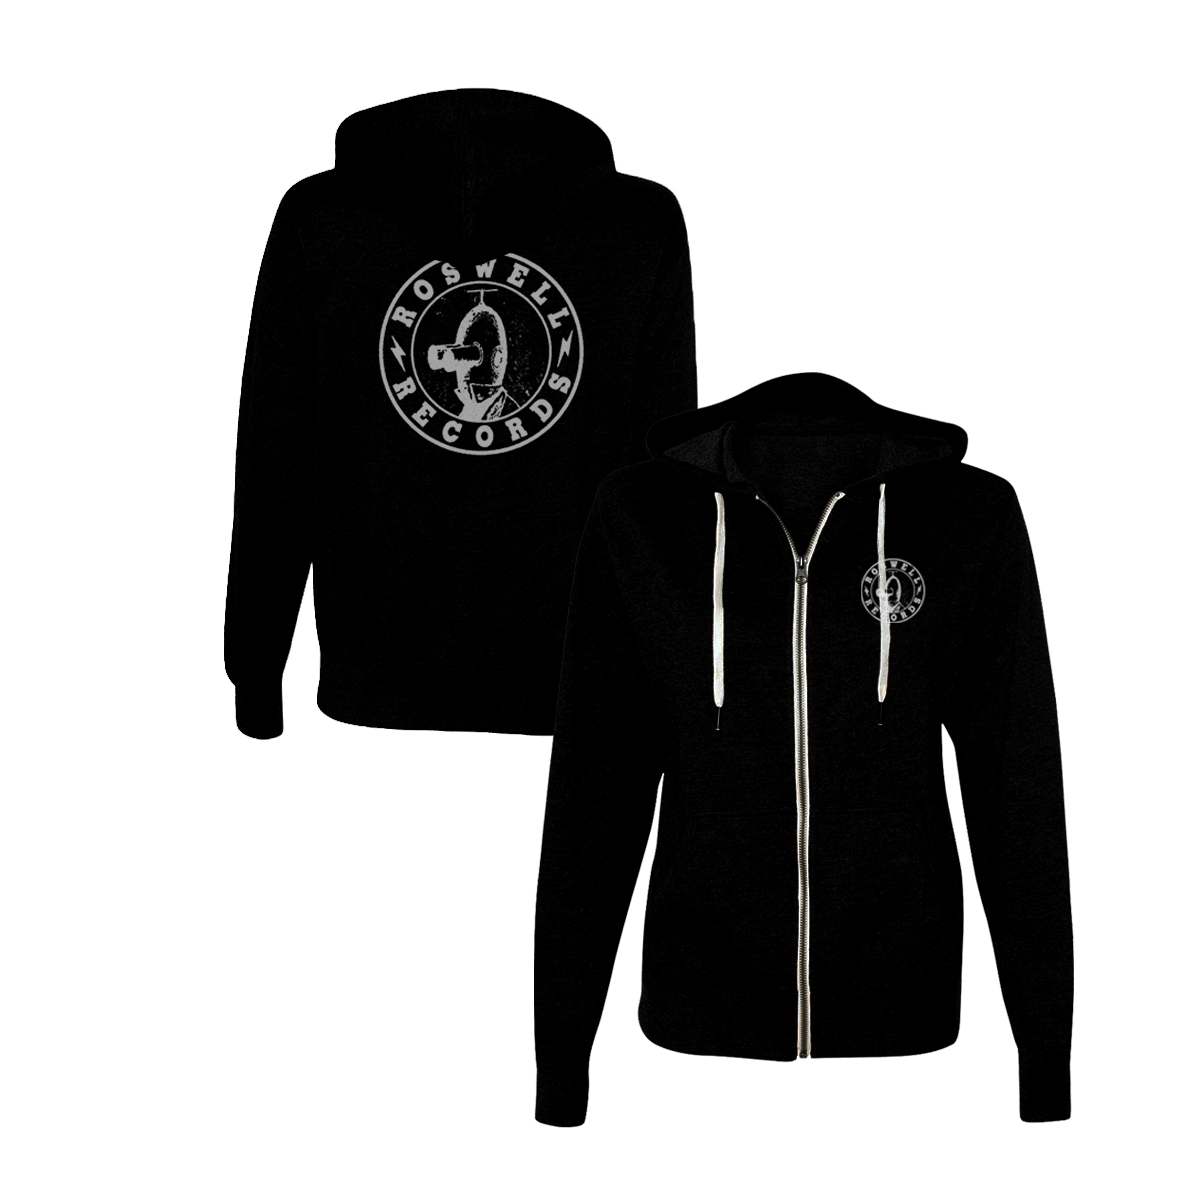 foo fighters tour merch